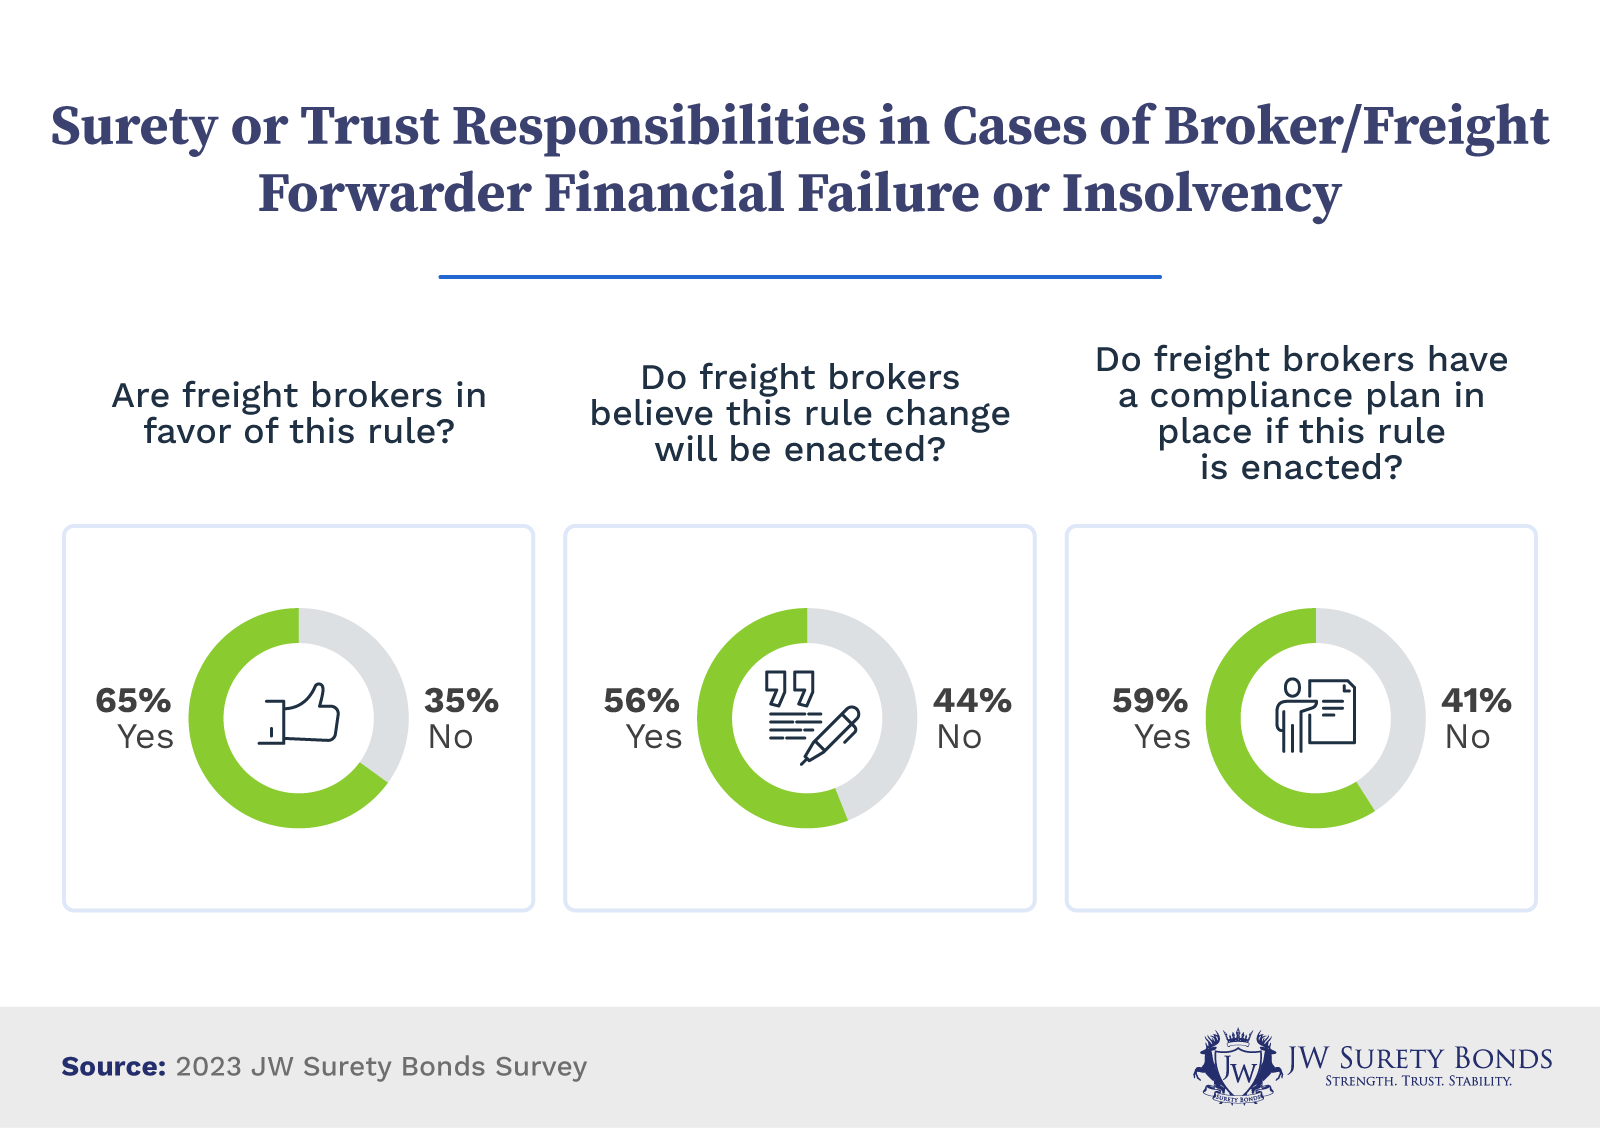 Surety or trust responsibilities in cases of broker/freight forwarder financial failure or insolvency.